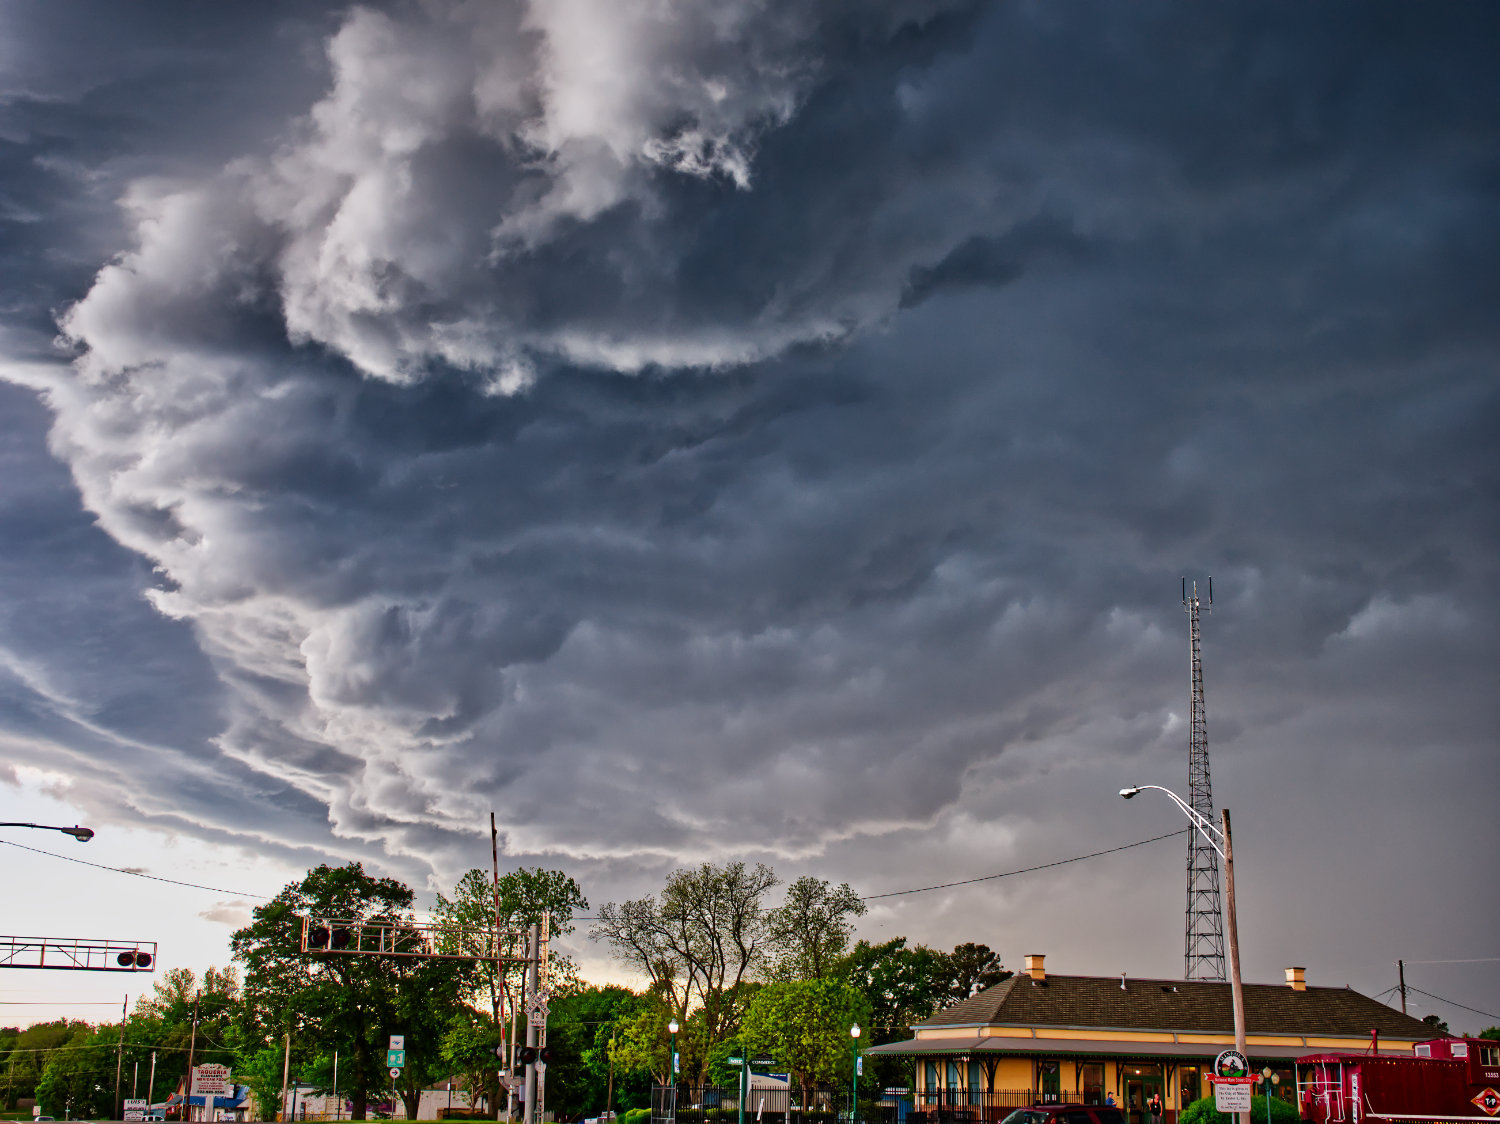 The clouds roll into Mineola just minutes before heavy winds caused damage across Wood County on Sunday evening.